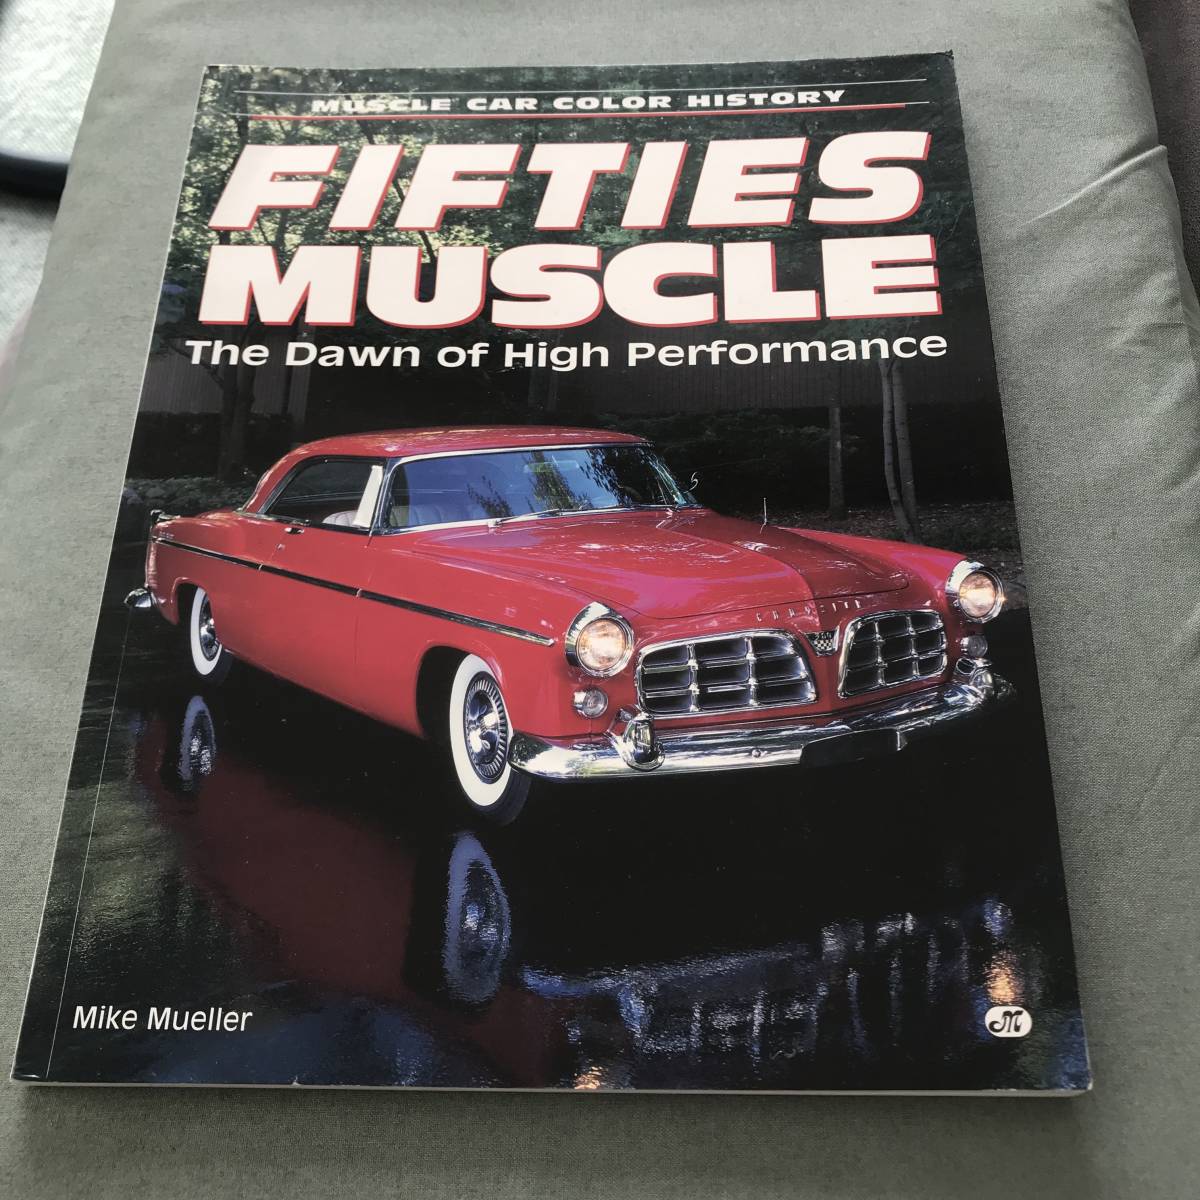 Fifties Muscle: The Dawn of High Performance (Muscle Car Color History)　５０年代　アメ車　マッスルカー　旧車 洋書　フィフティーズ_画像1